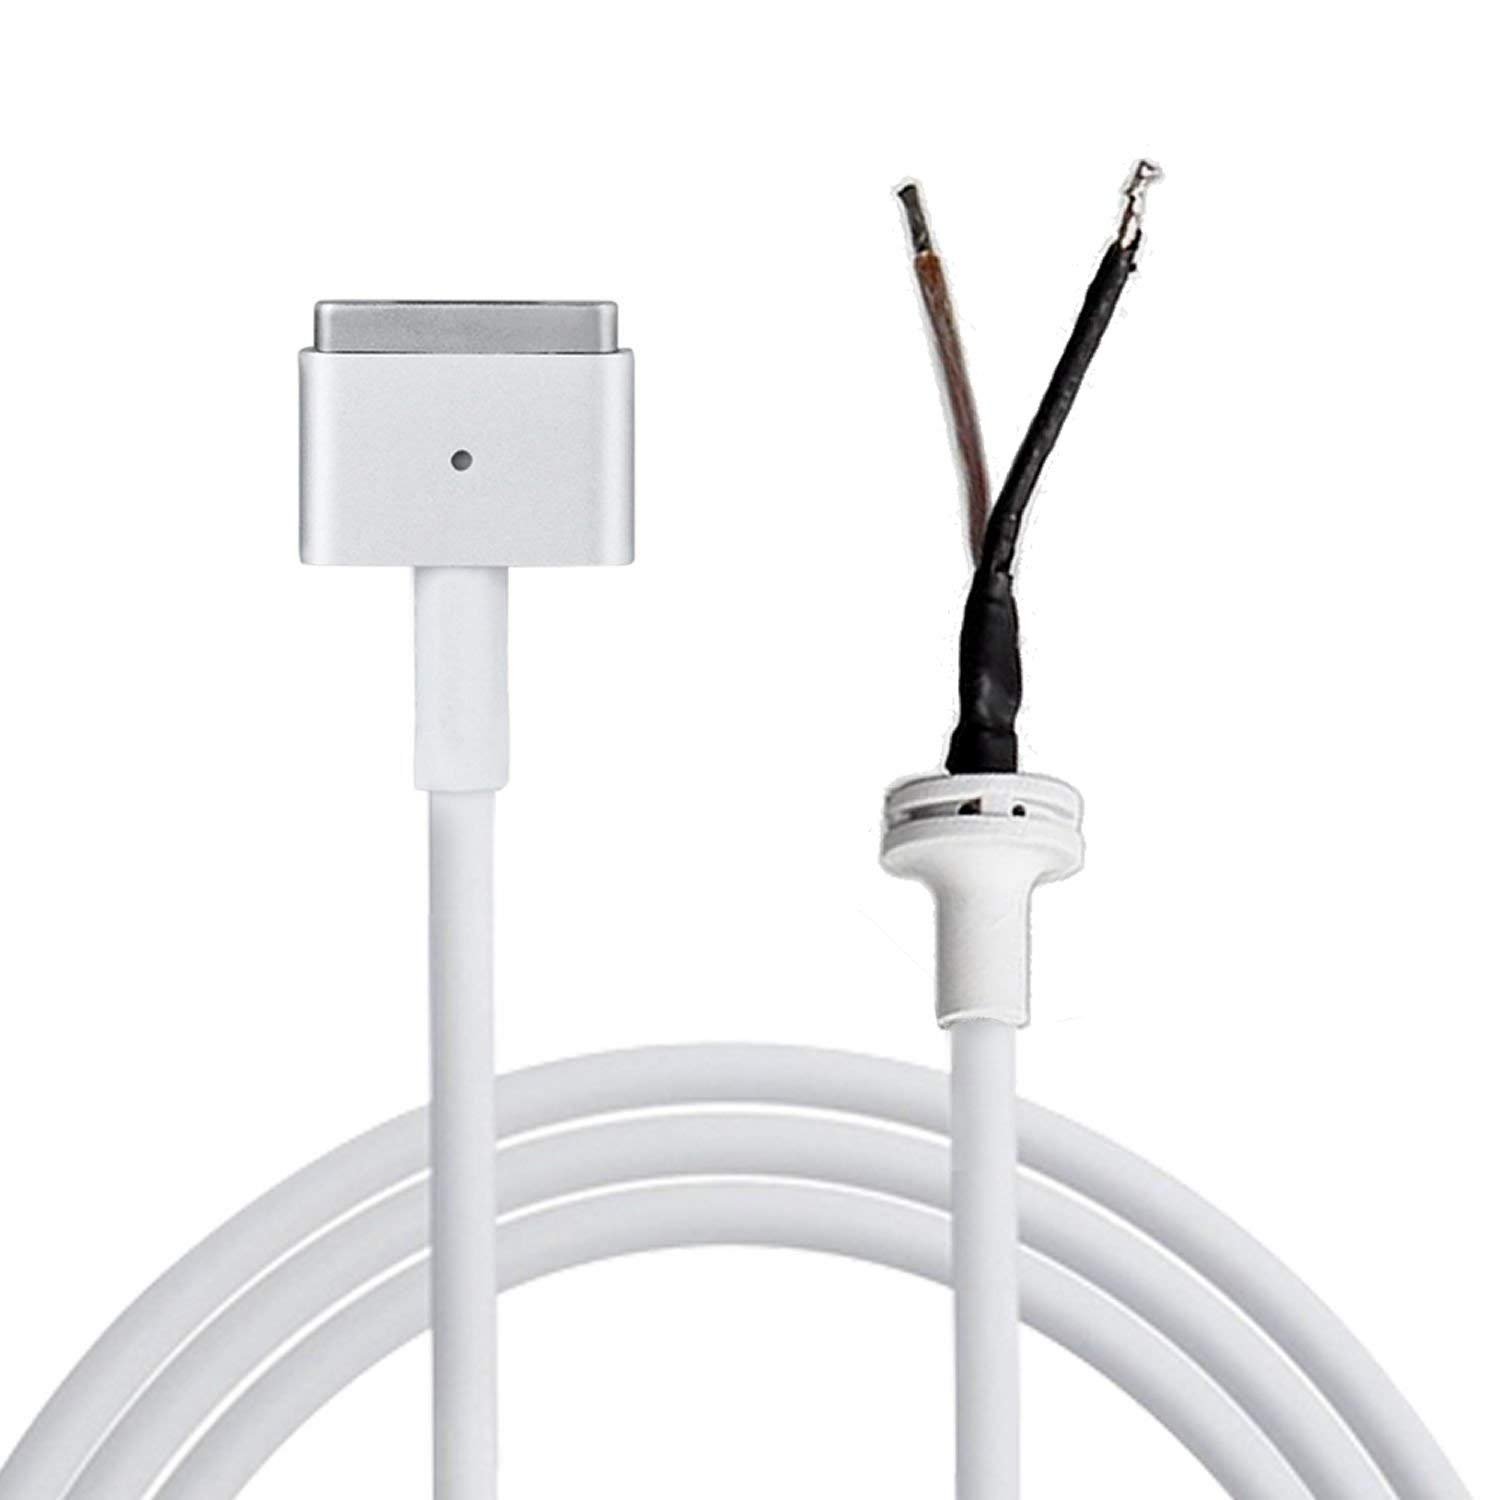 ethernet cable for macbook air best buy